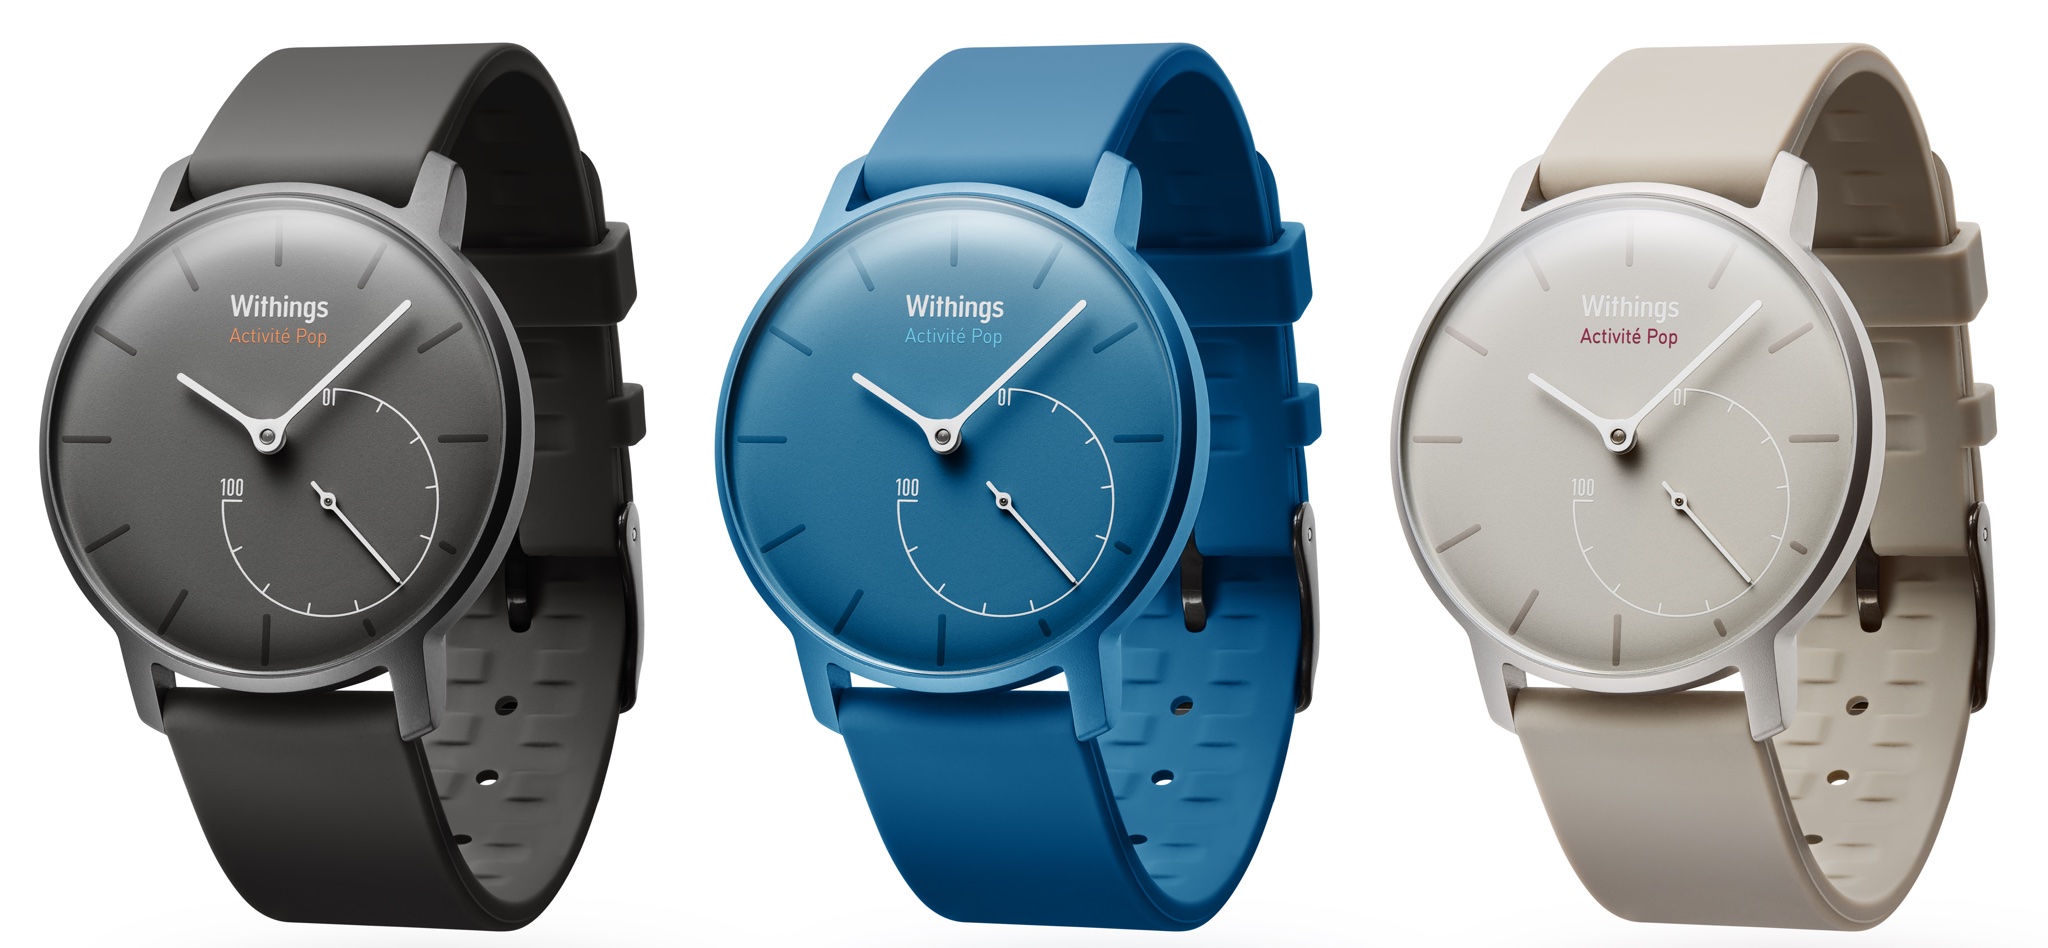 Withings Activite Pop image 003